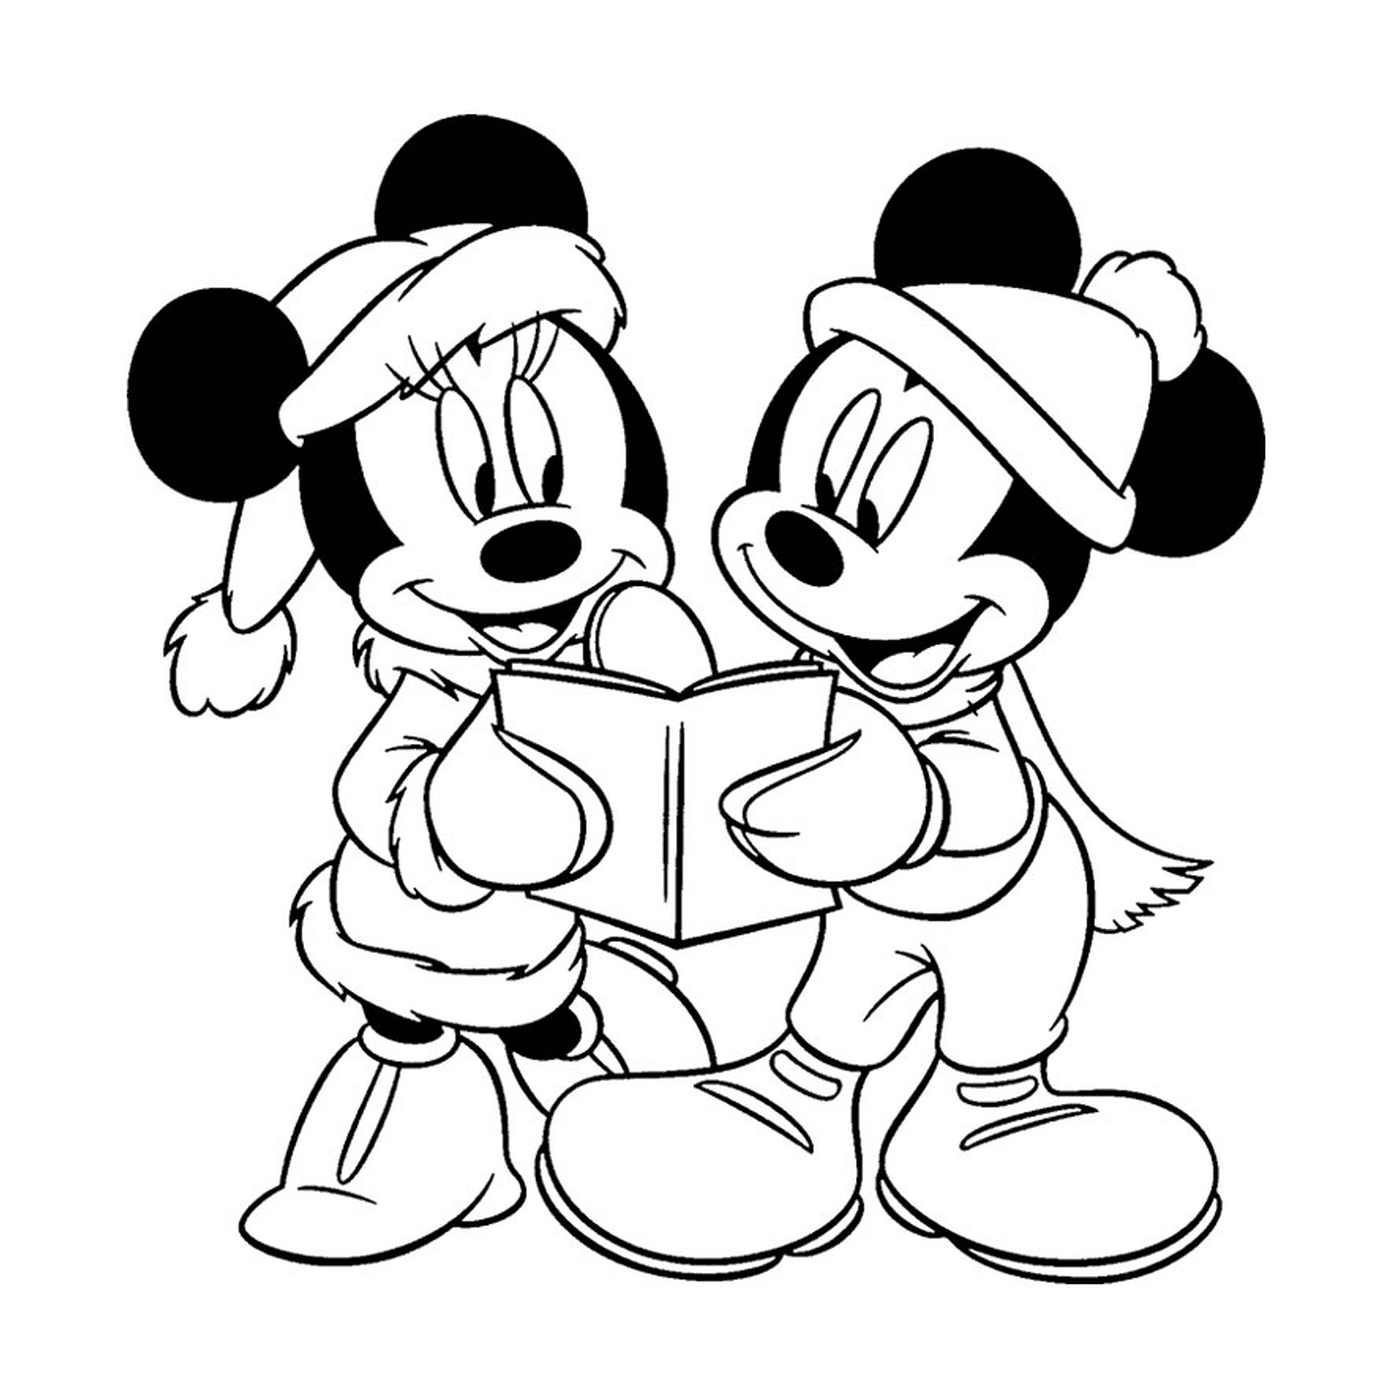  Mickey Mouse and Minnie Mouse read a book together 